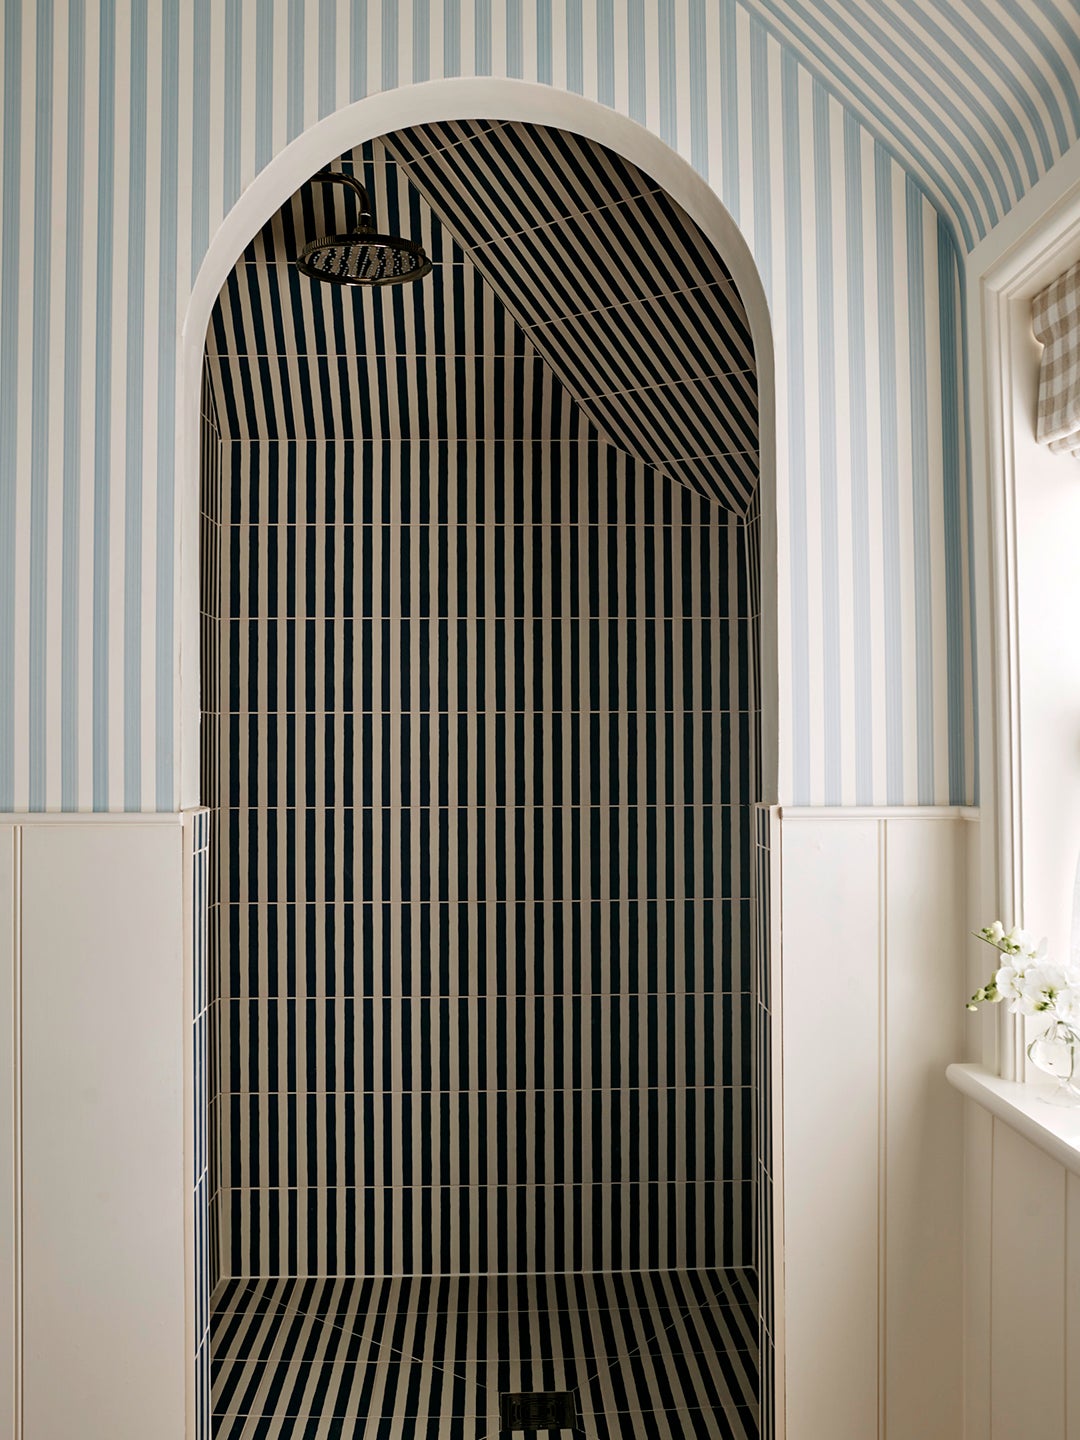 tiled shower with arch entry